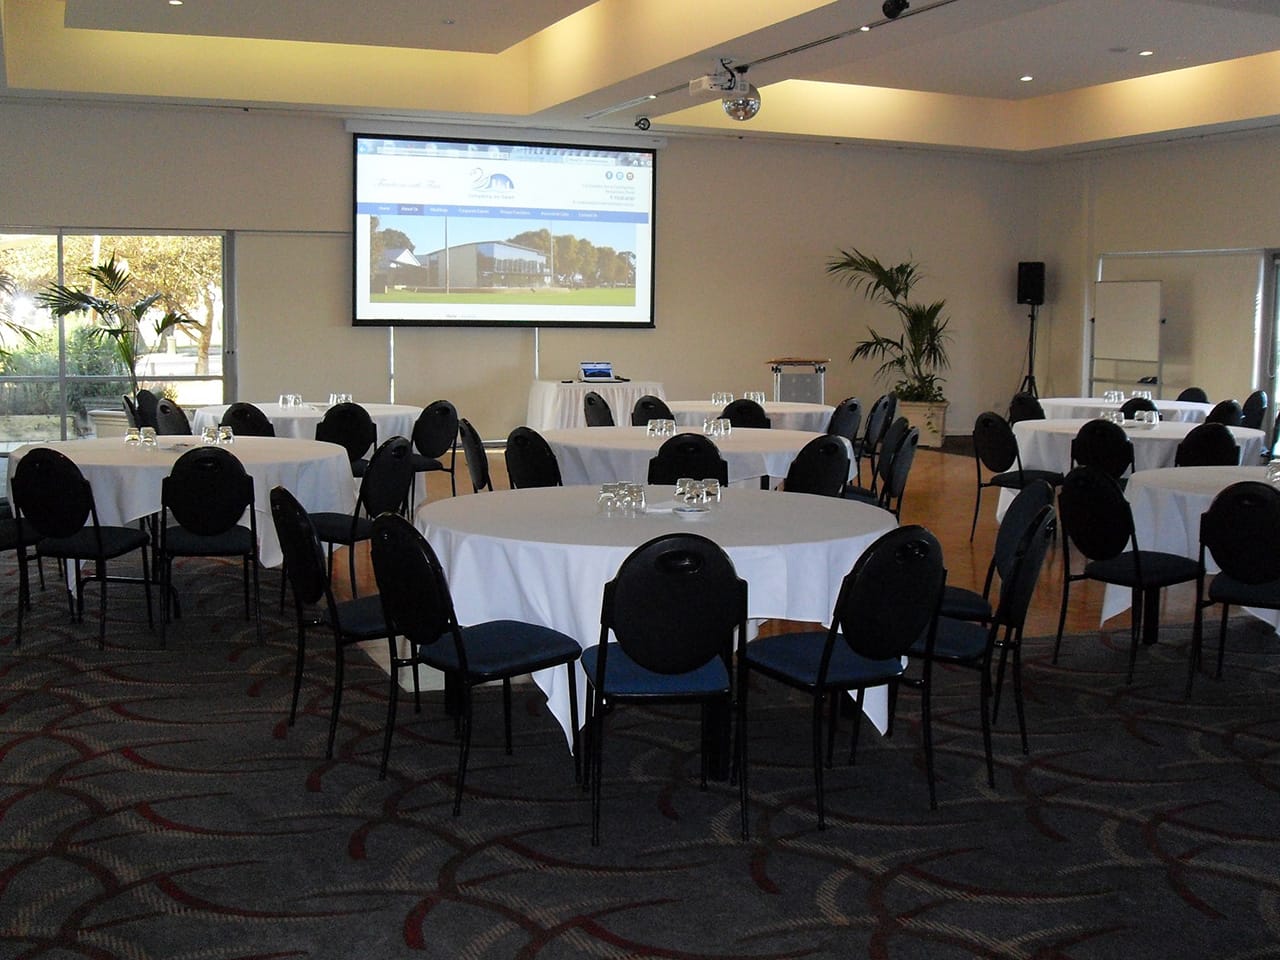 Banquet Style Setup With Projection Screen Inside The Function Room